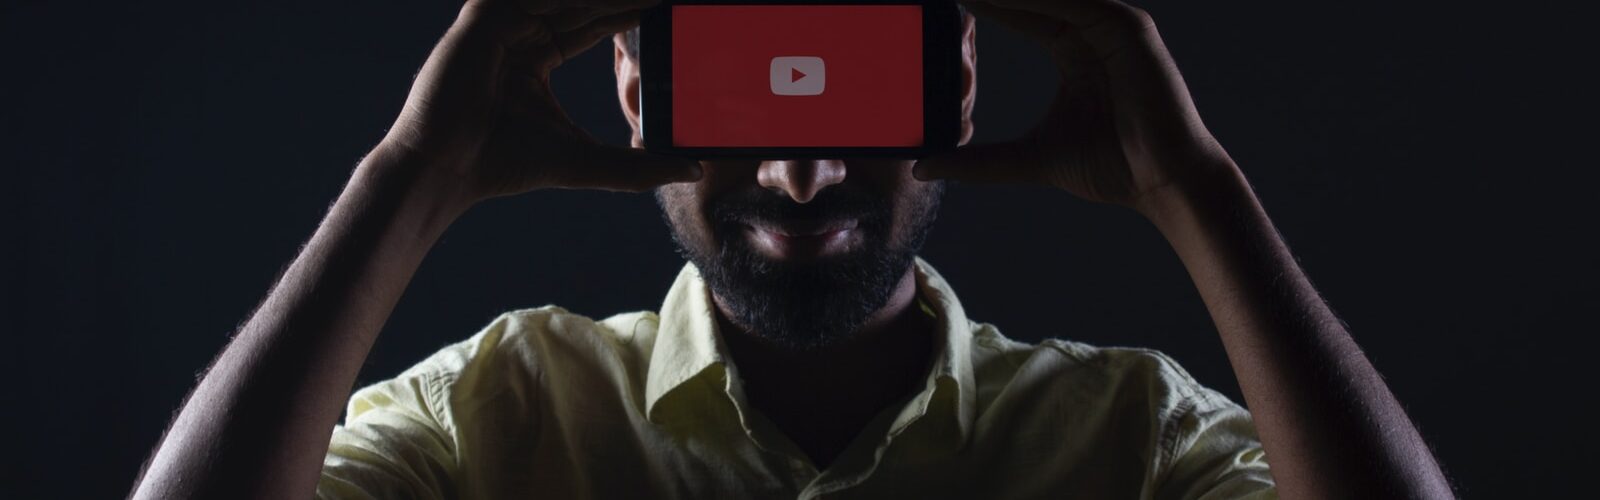 Powerhouse Video Marketing as an Online Marketer - Making Lots of Money YouTube